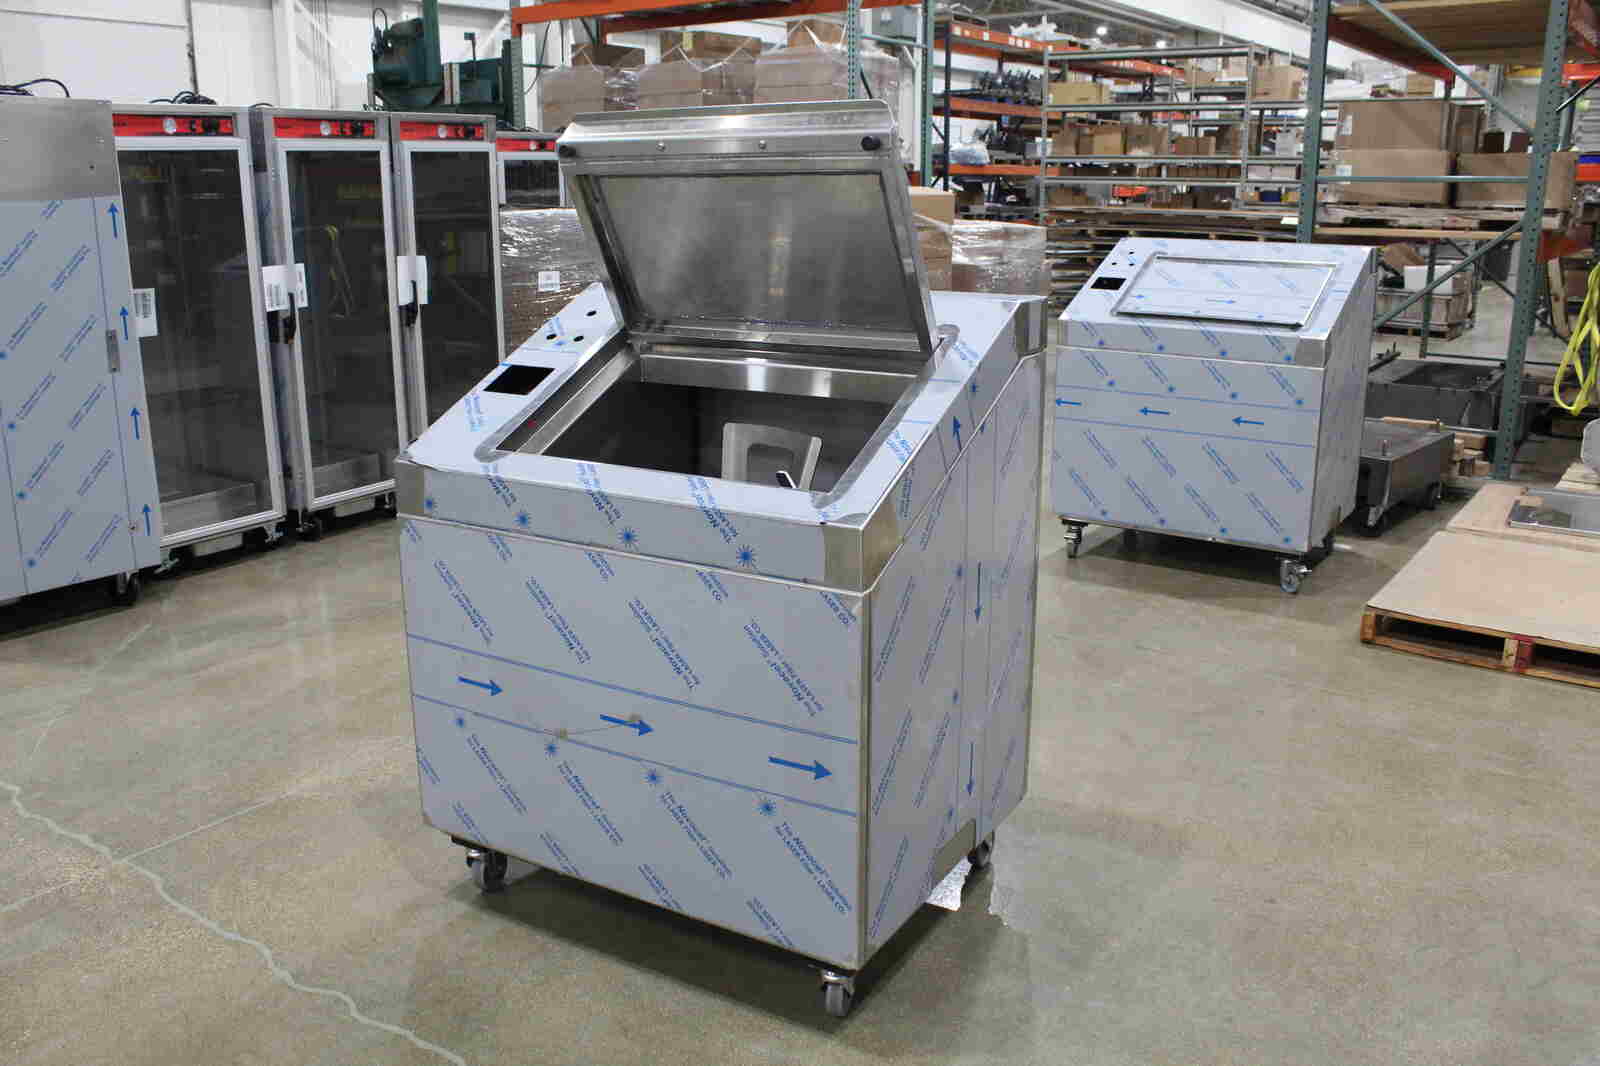 Full front view of a stainless steel food service biodigester